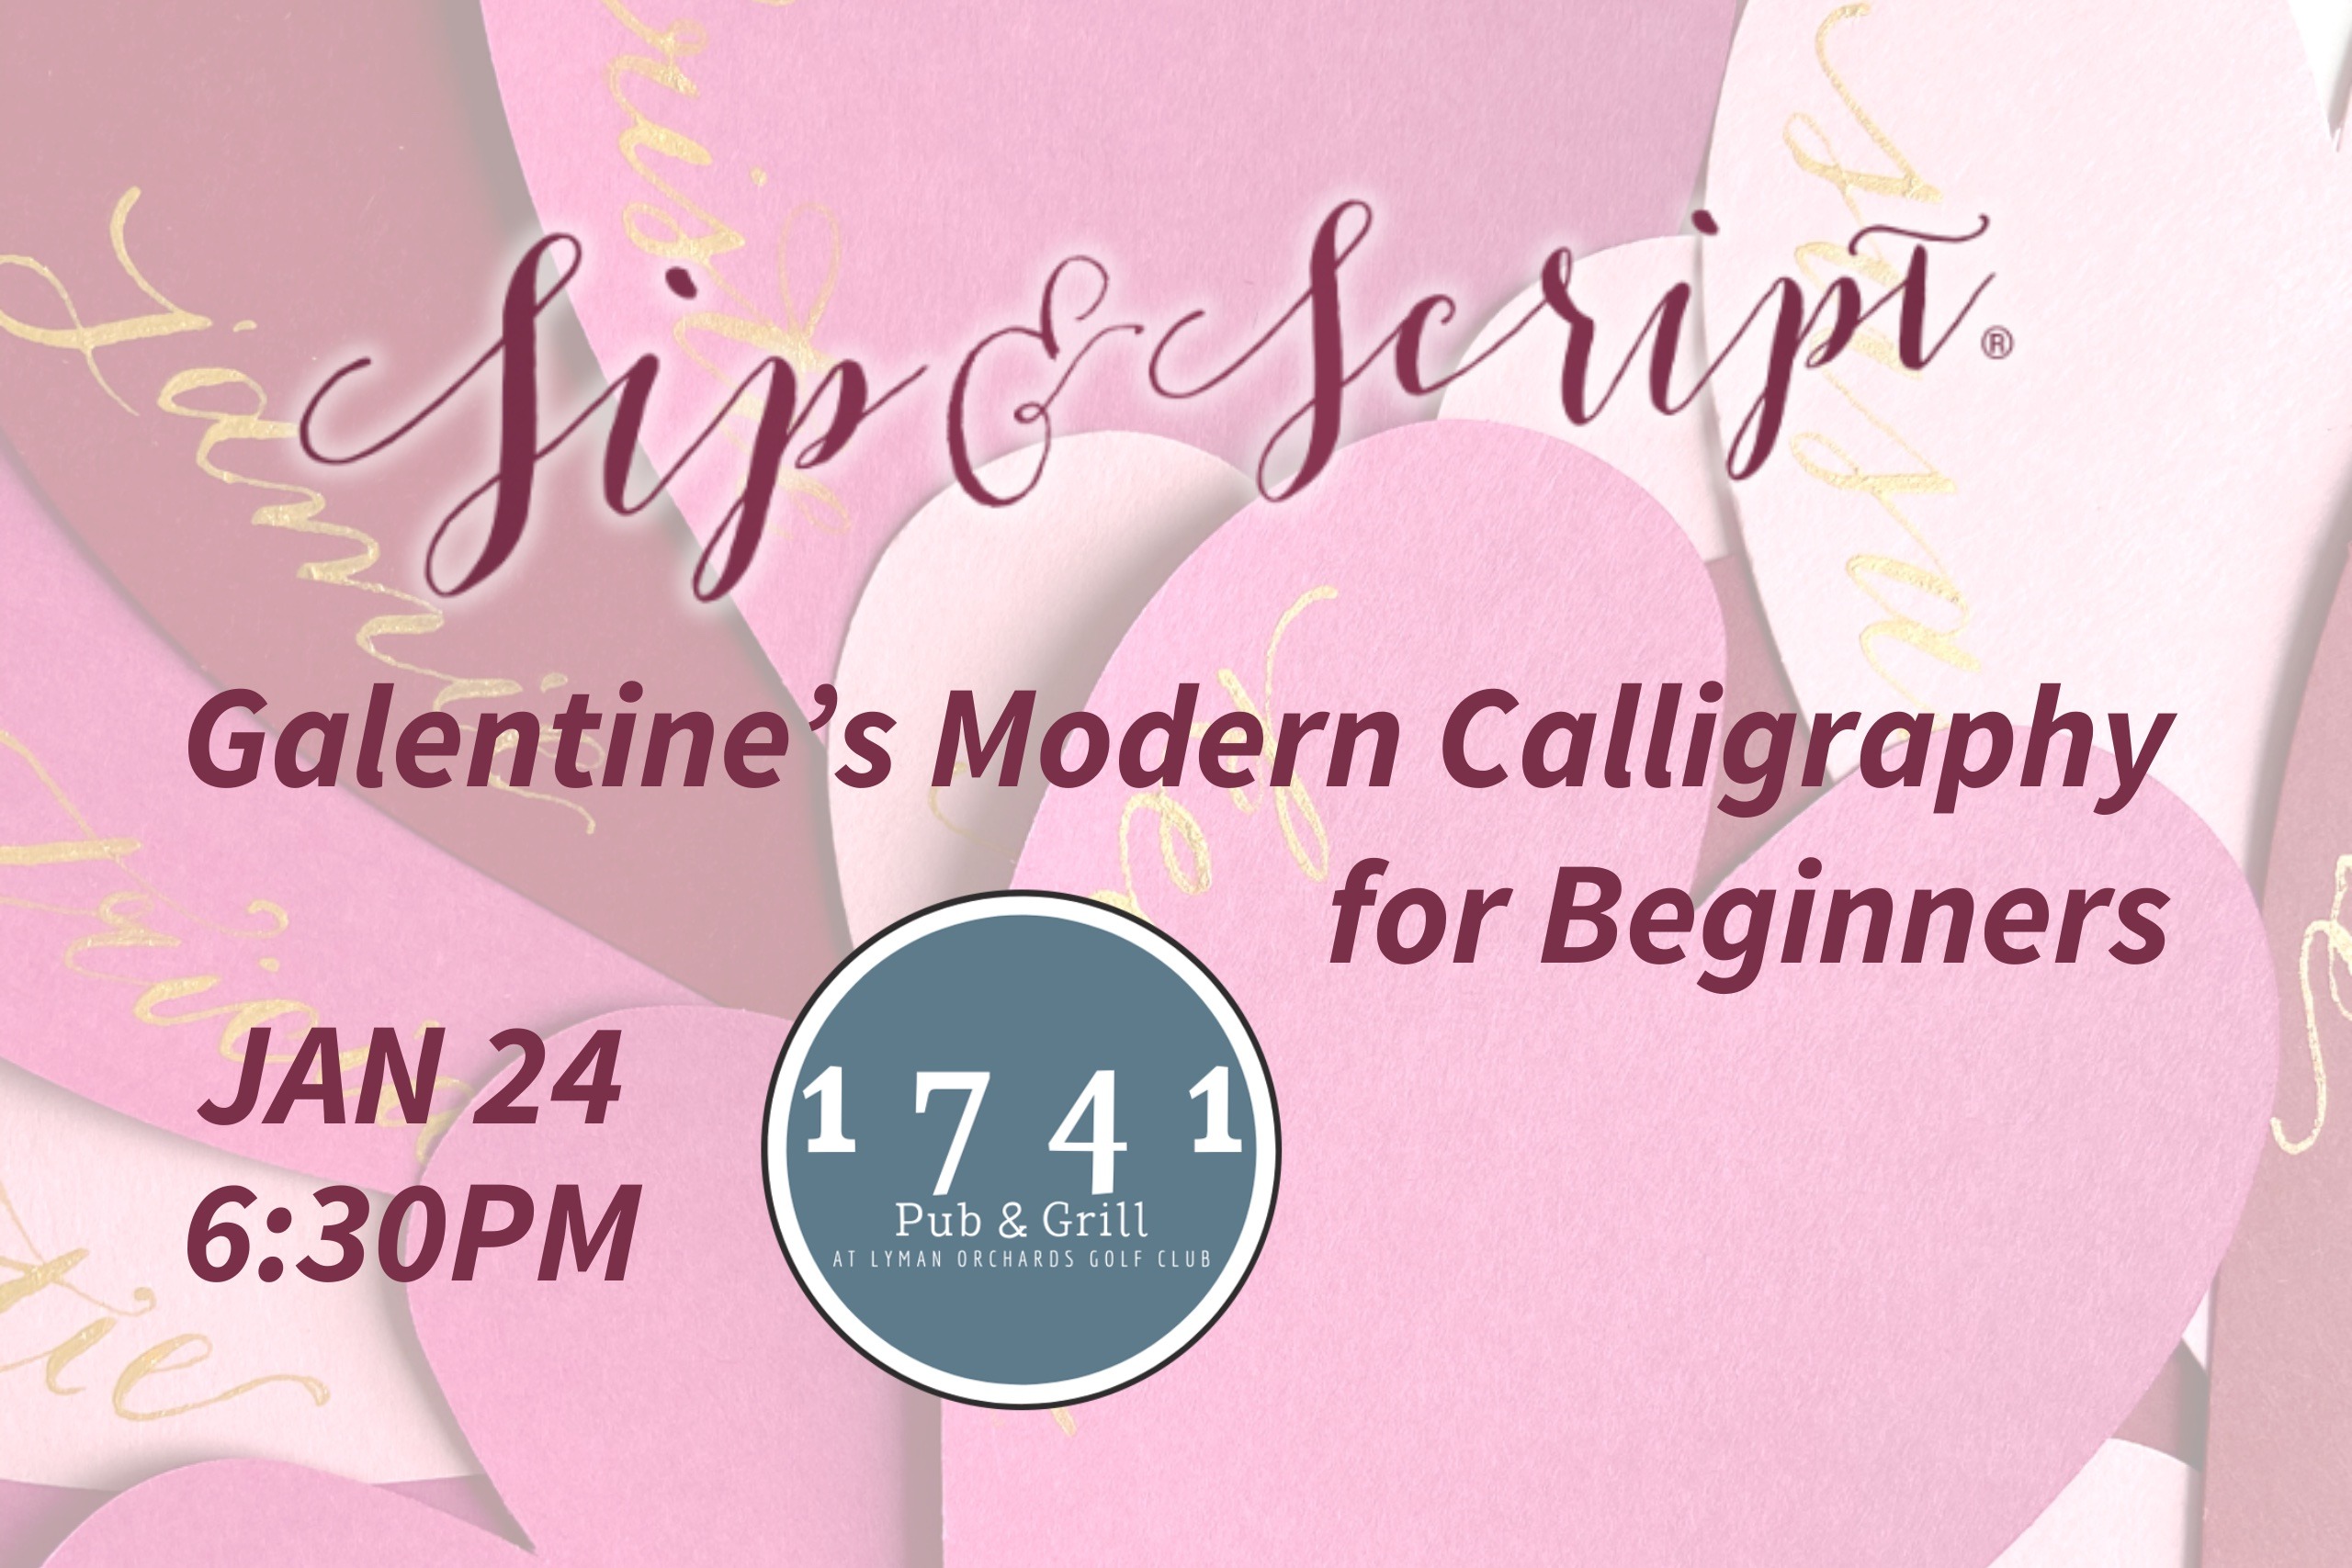 Sip and Script: Galentine's Modern Calligraphy for Beginners